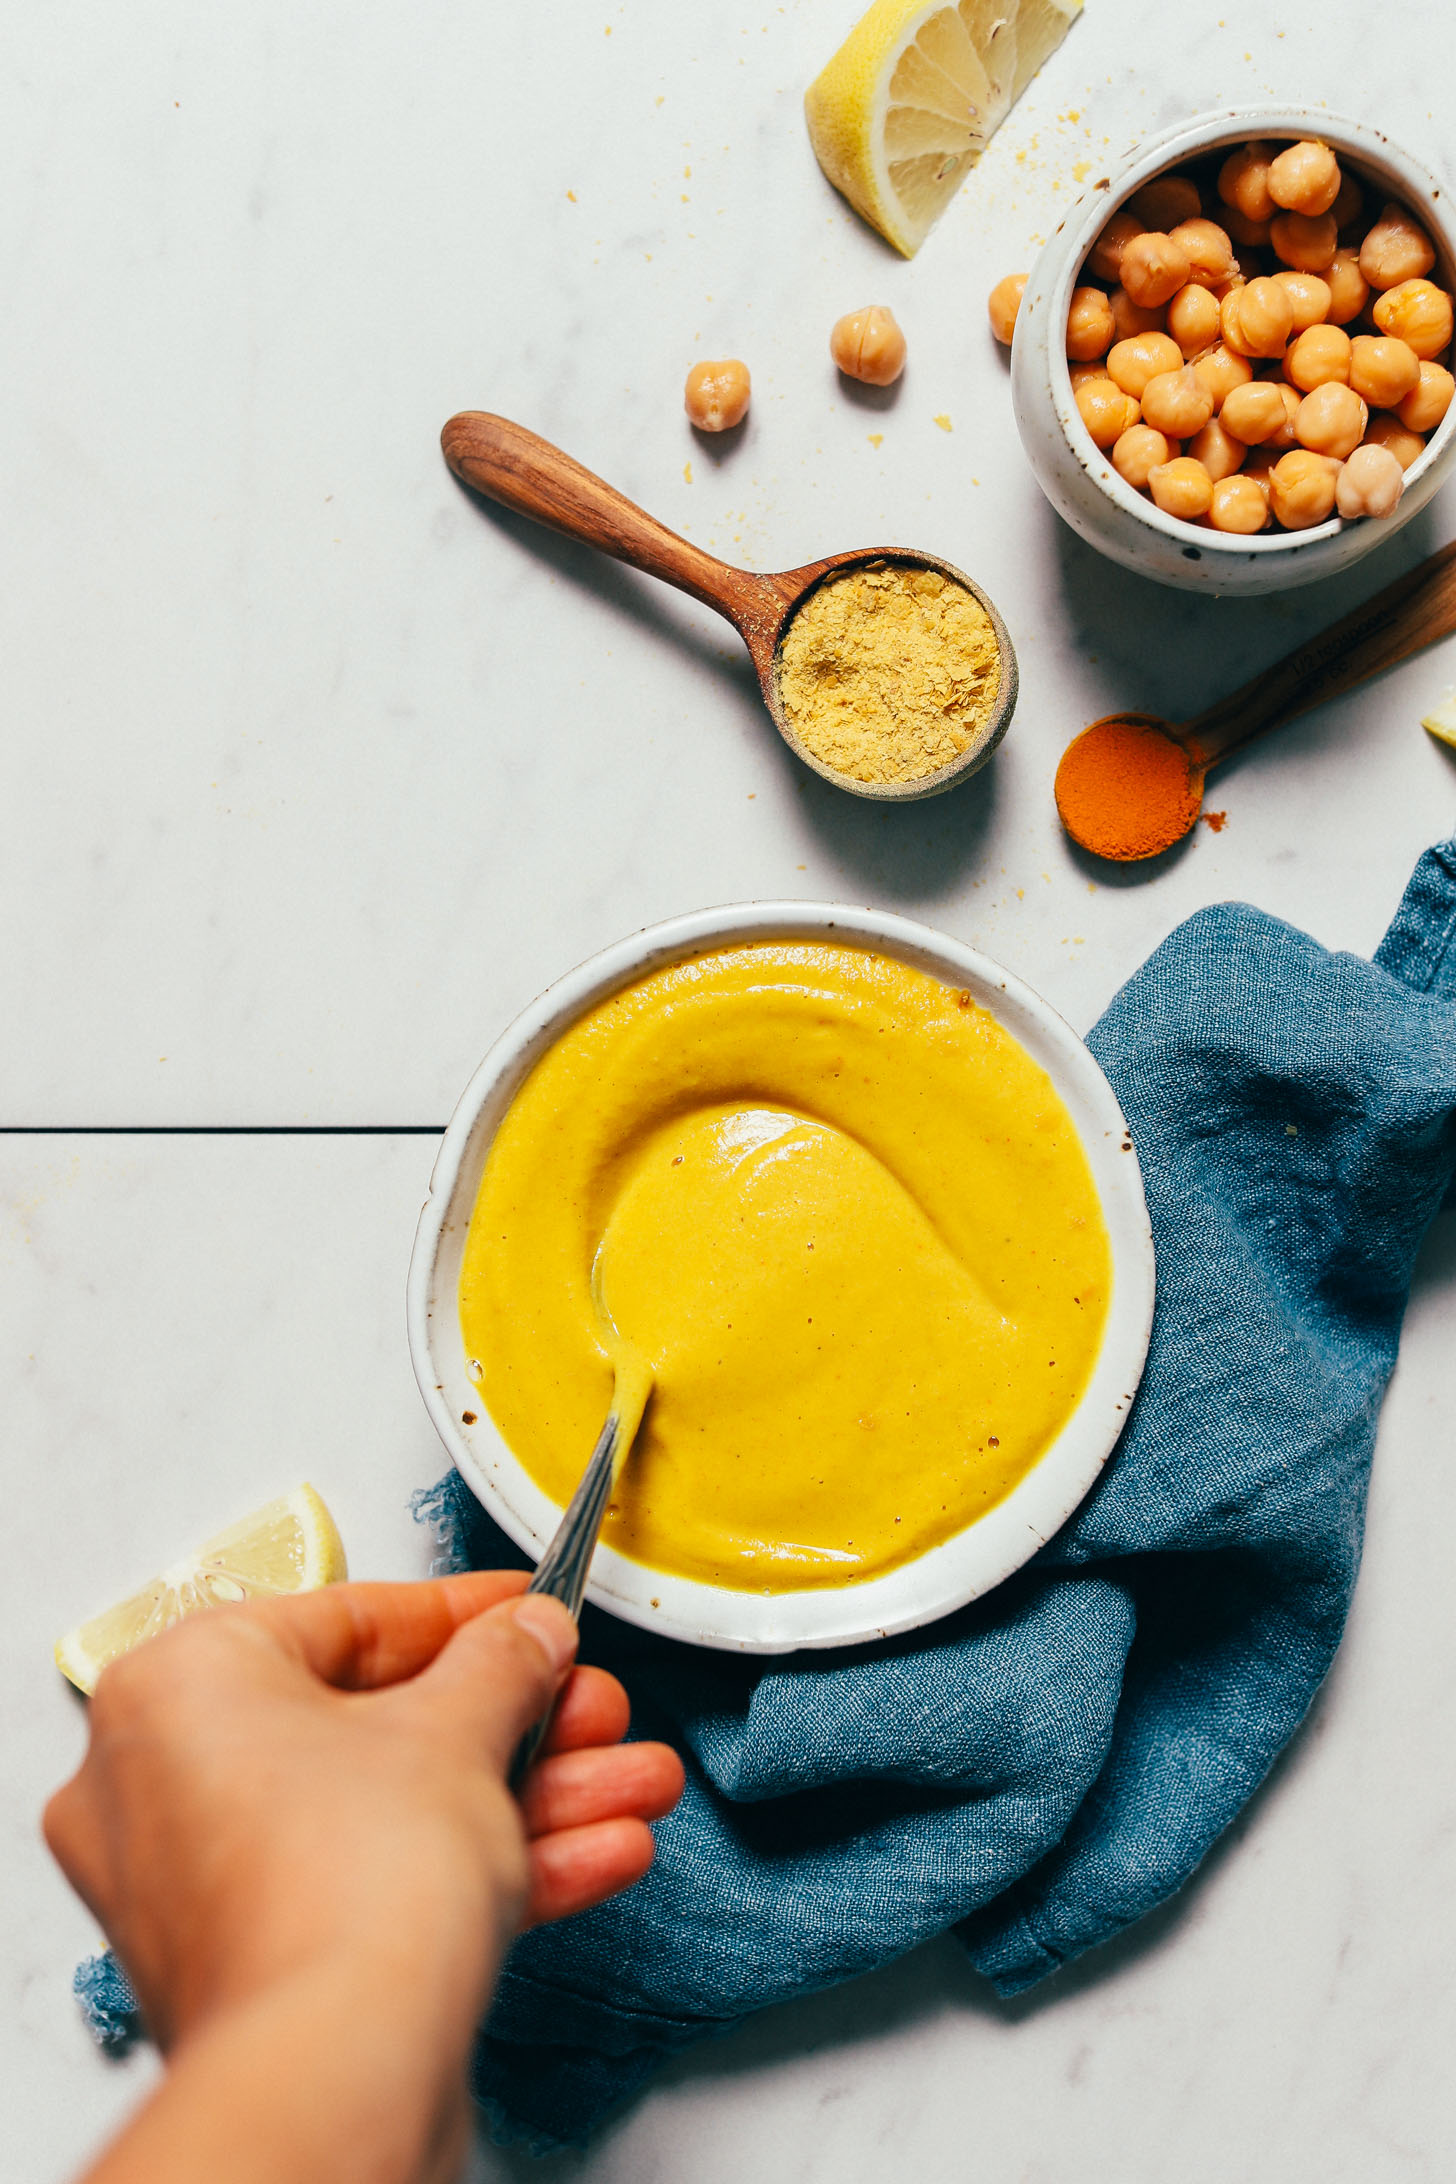 Stirring a bowl of our Liquid Gold Sauce recipe made from chickpeas and nutritional yeast